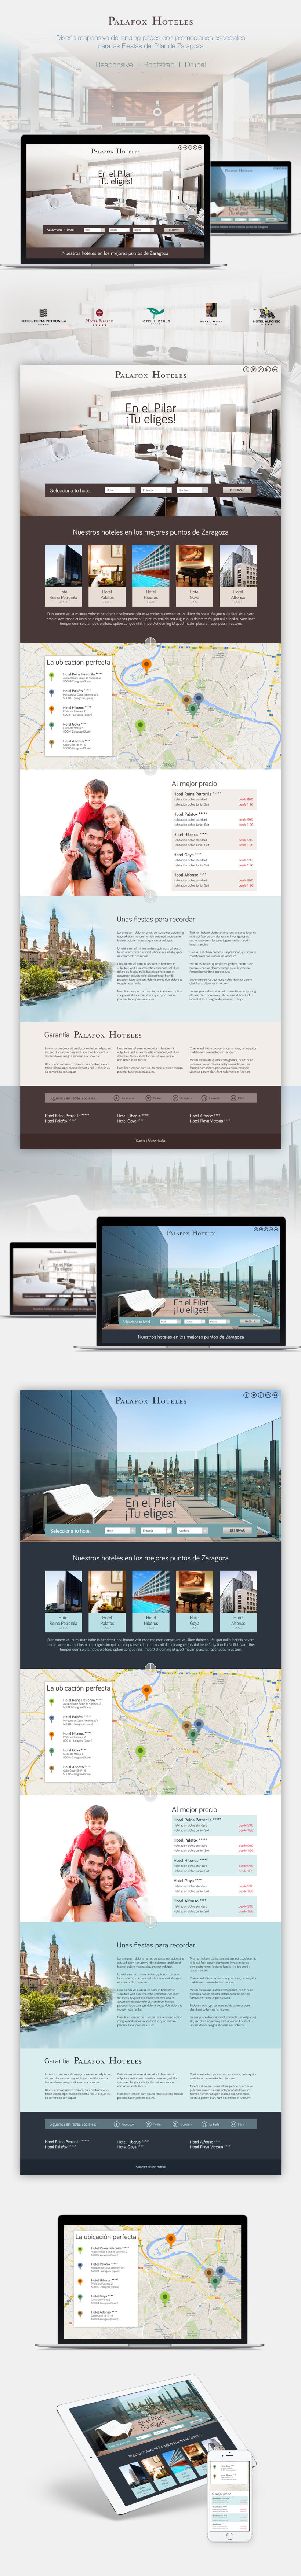 Palafox Hoteles | Landing Pages -1